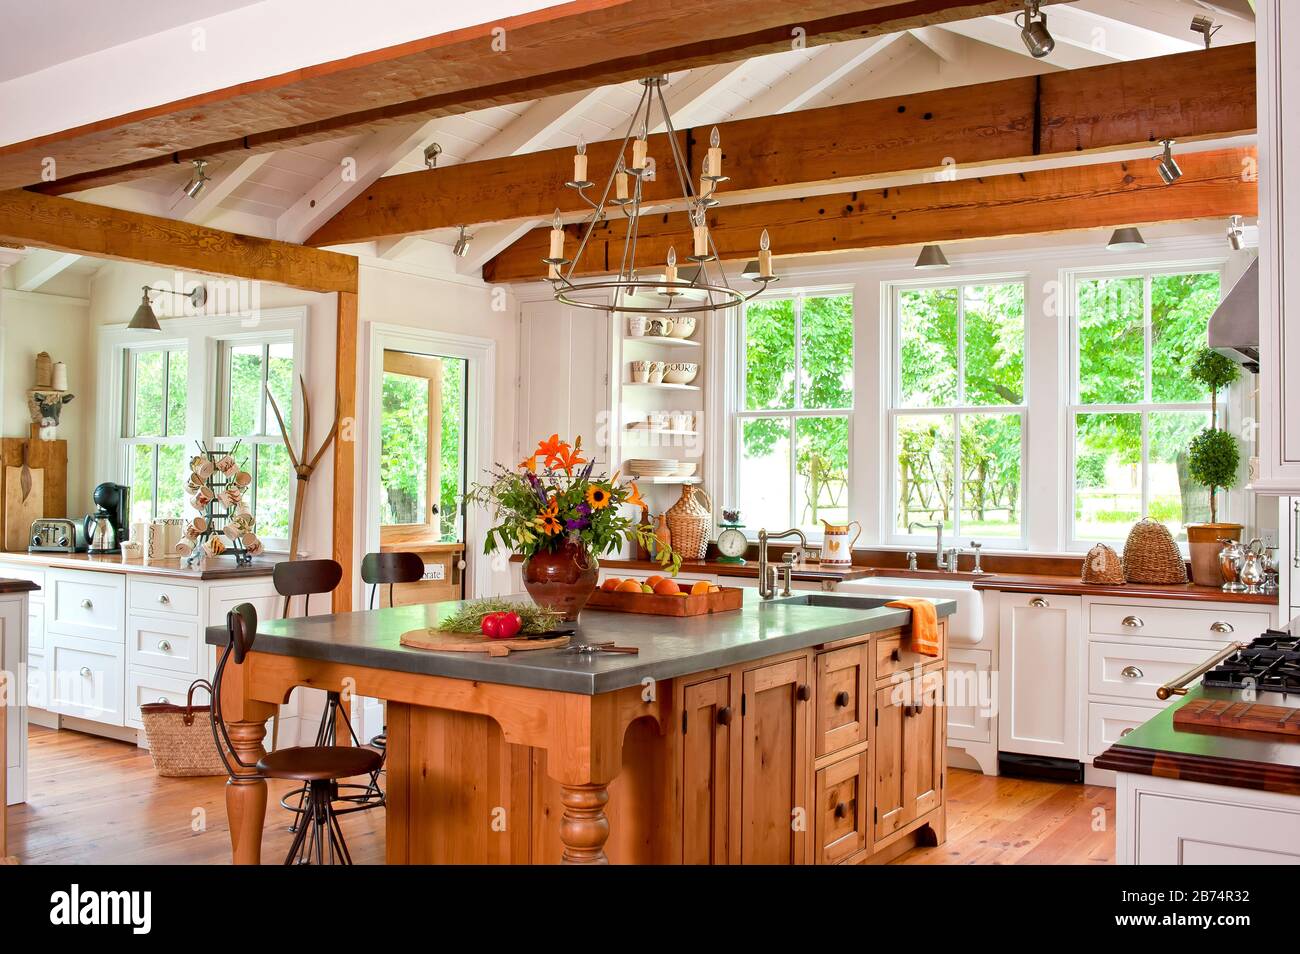 Kitchen: American country styled farmhouse, whole house tour feature Stock Photo